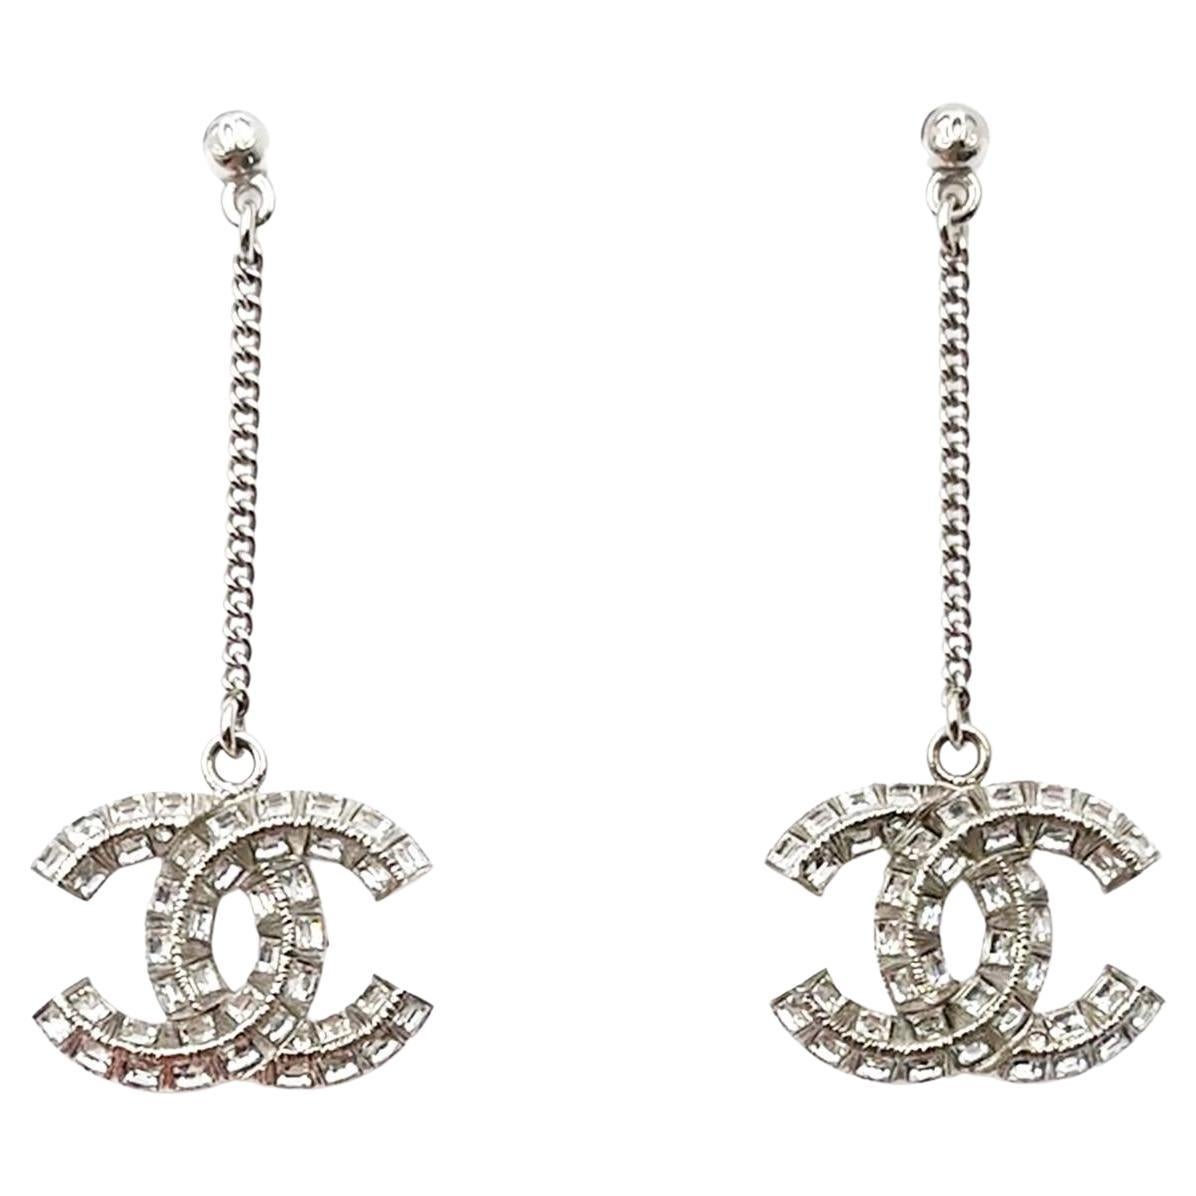 chanel gold and pearl earrings